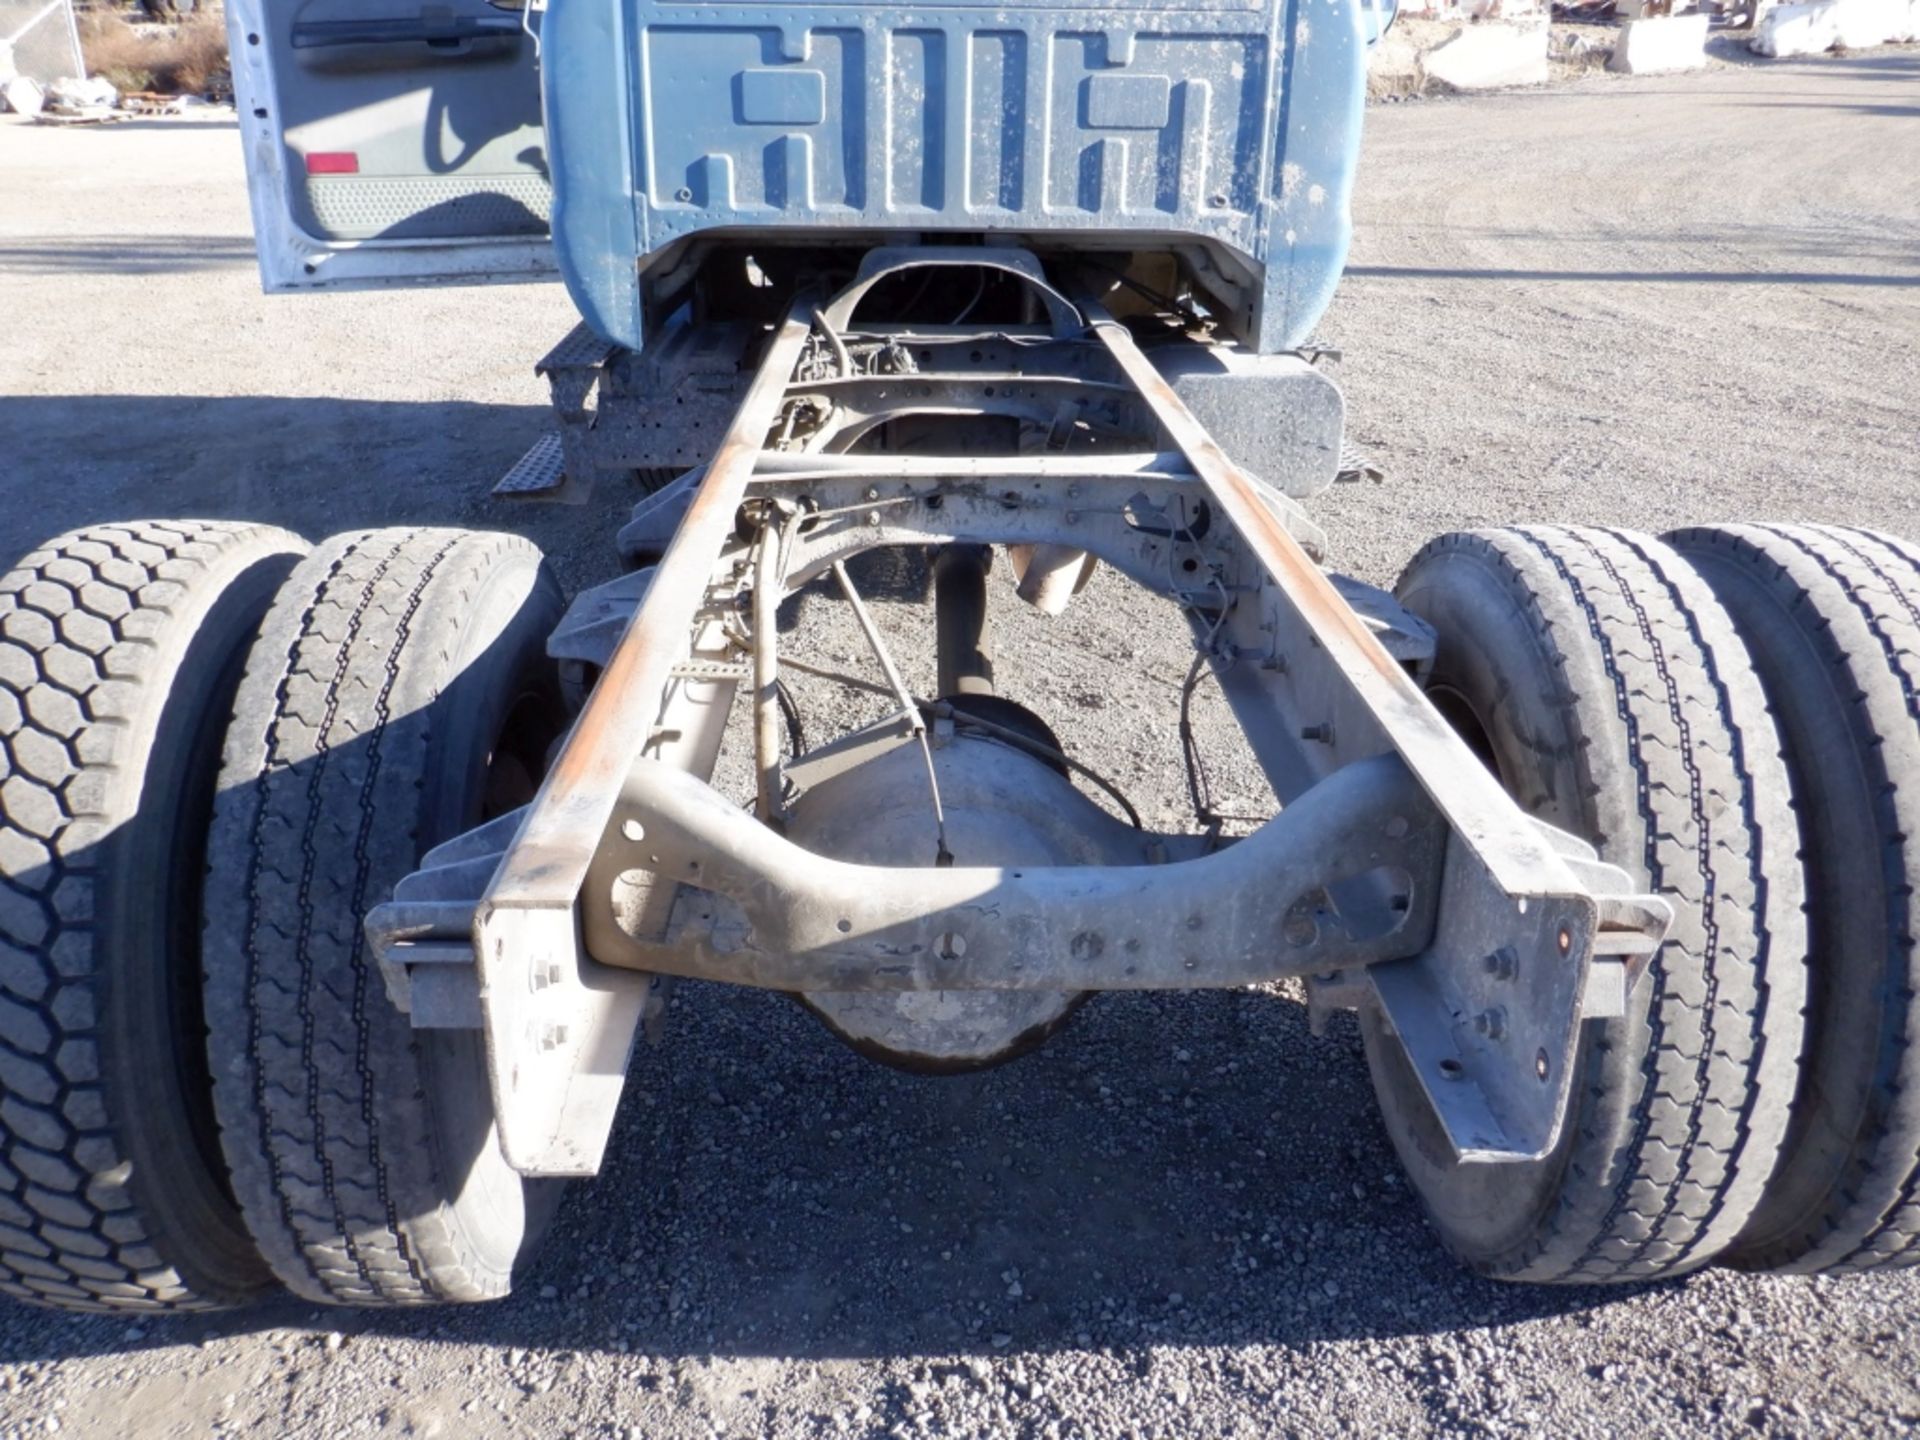 Ford F650 Super Duty Cab & Chassis, - Image 33 of 36